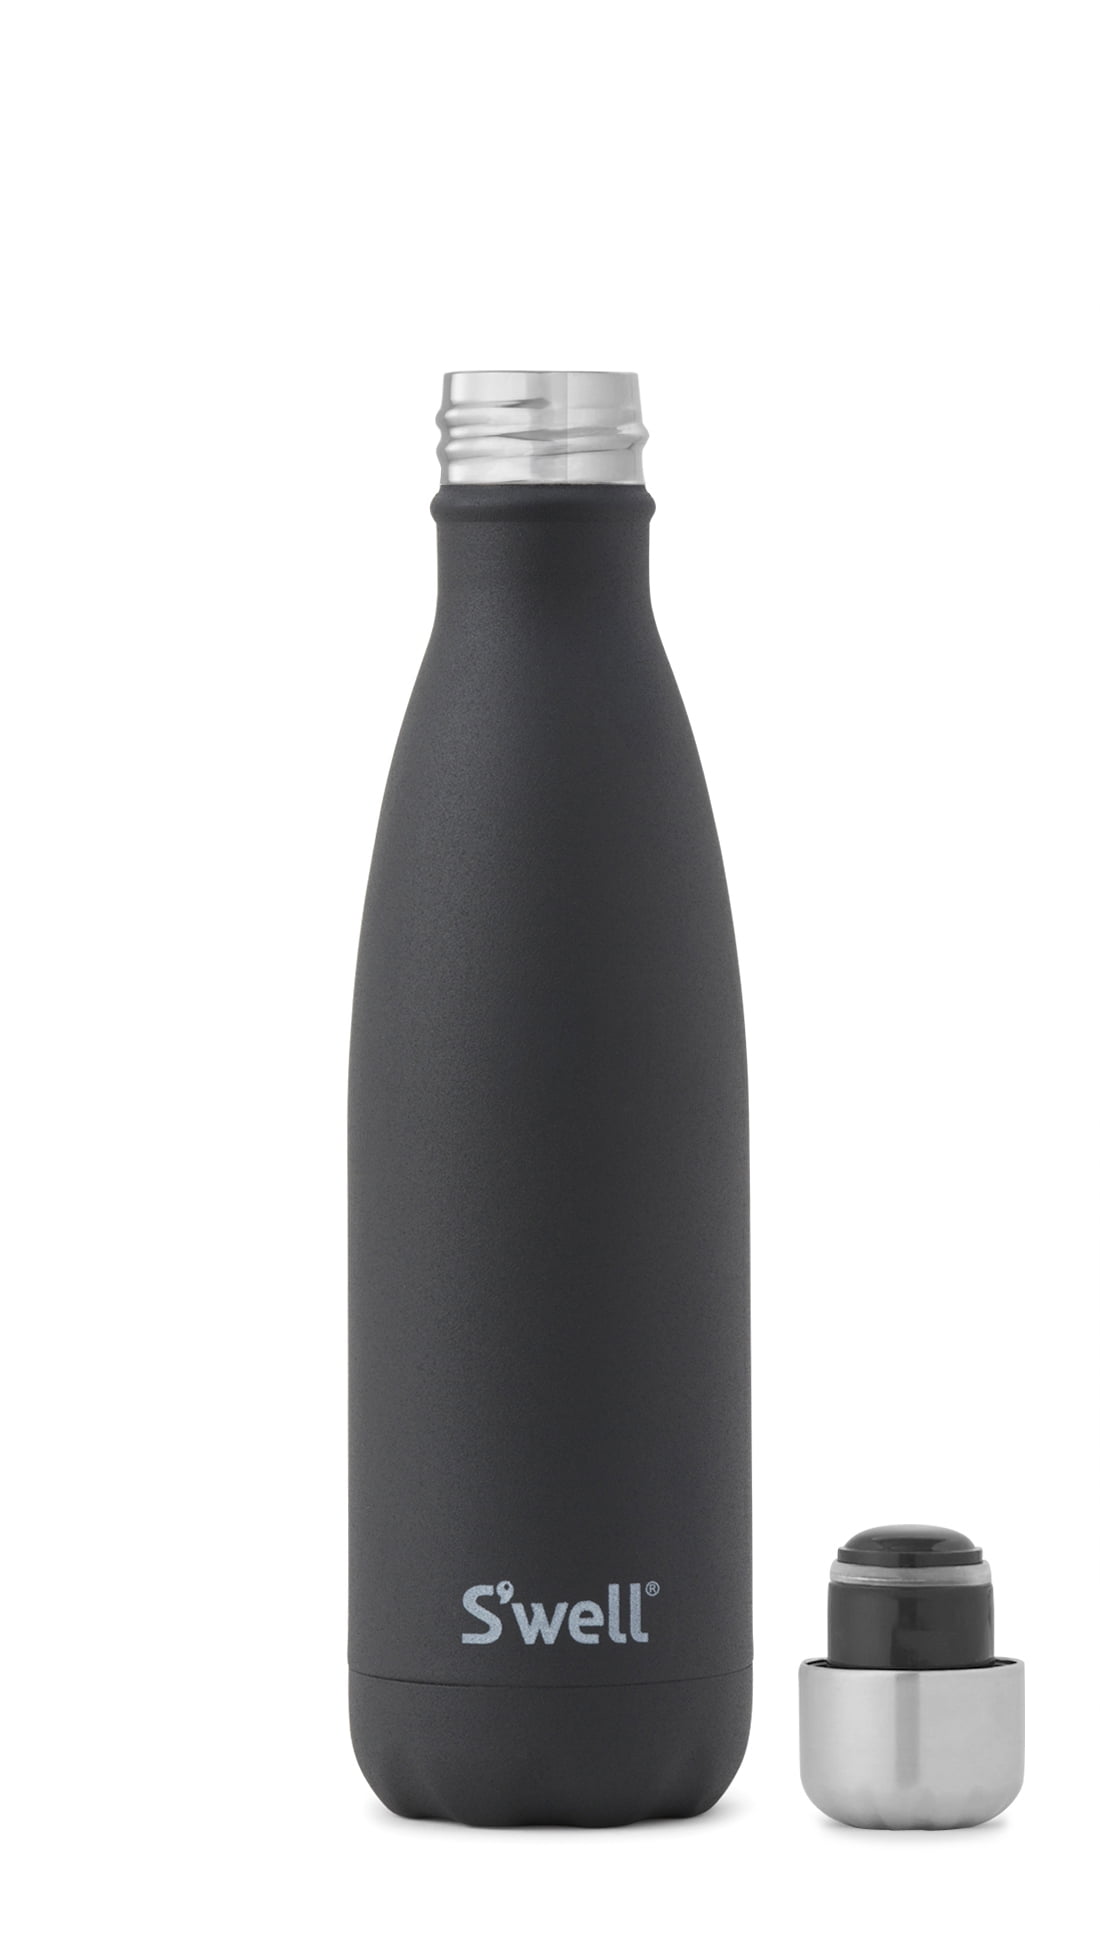 BMW Swell Bottle 17oz Stainless Steel Black Insulated 500mL -- NEW IN BOX